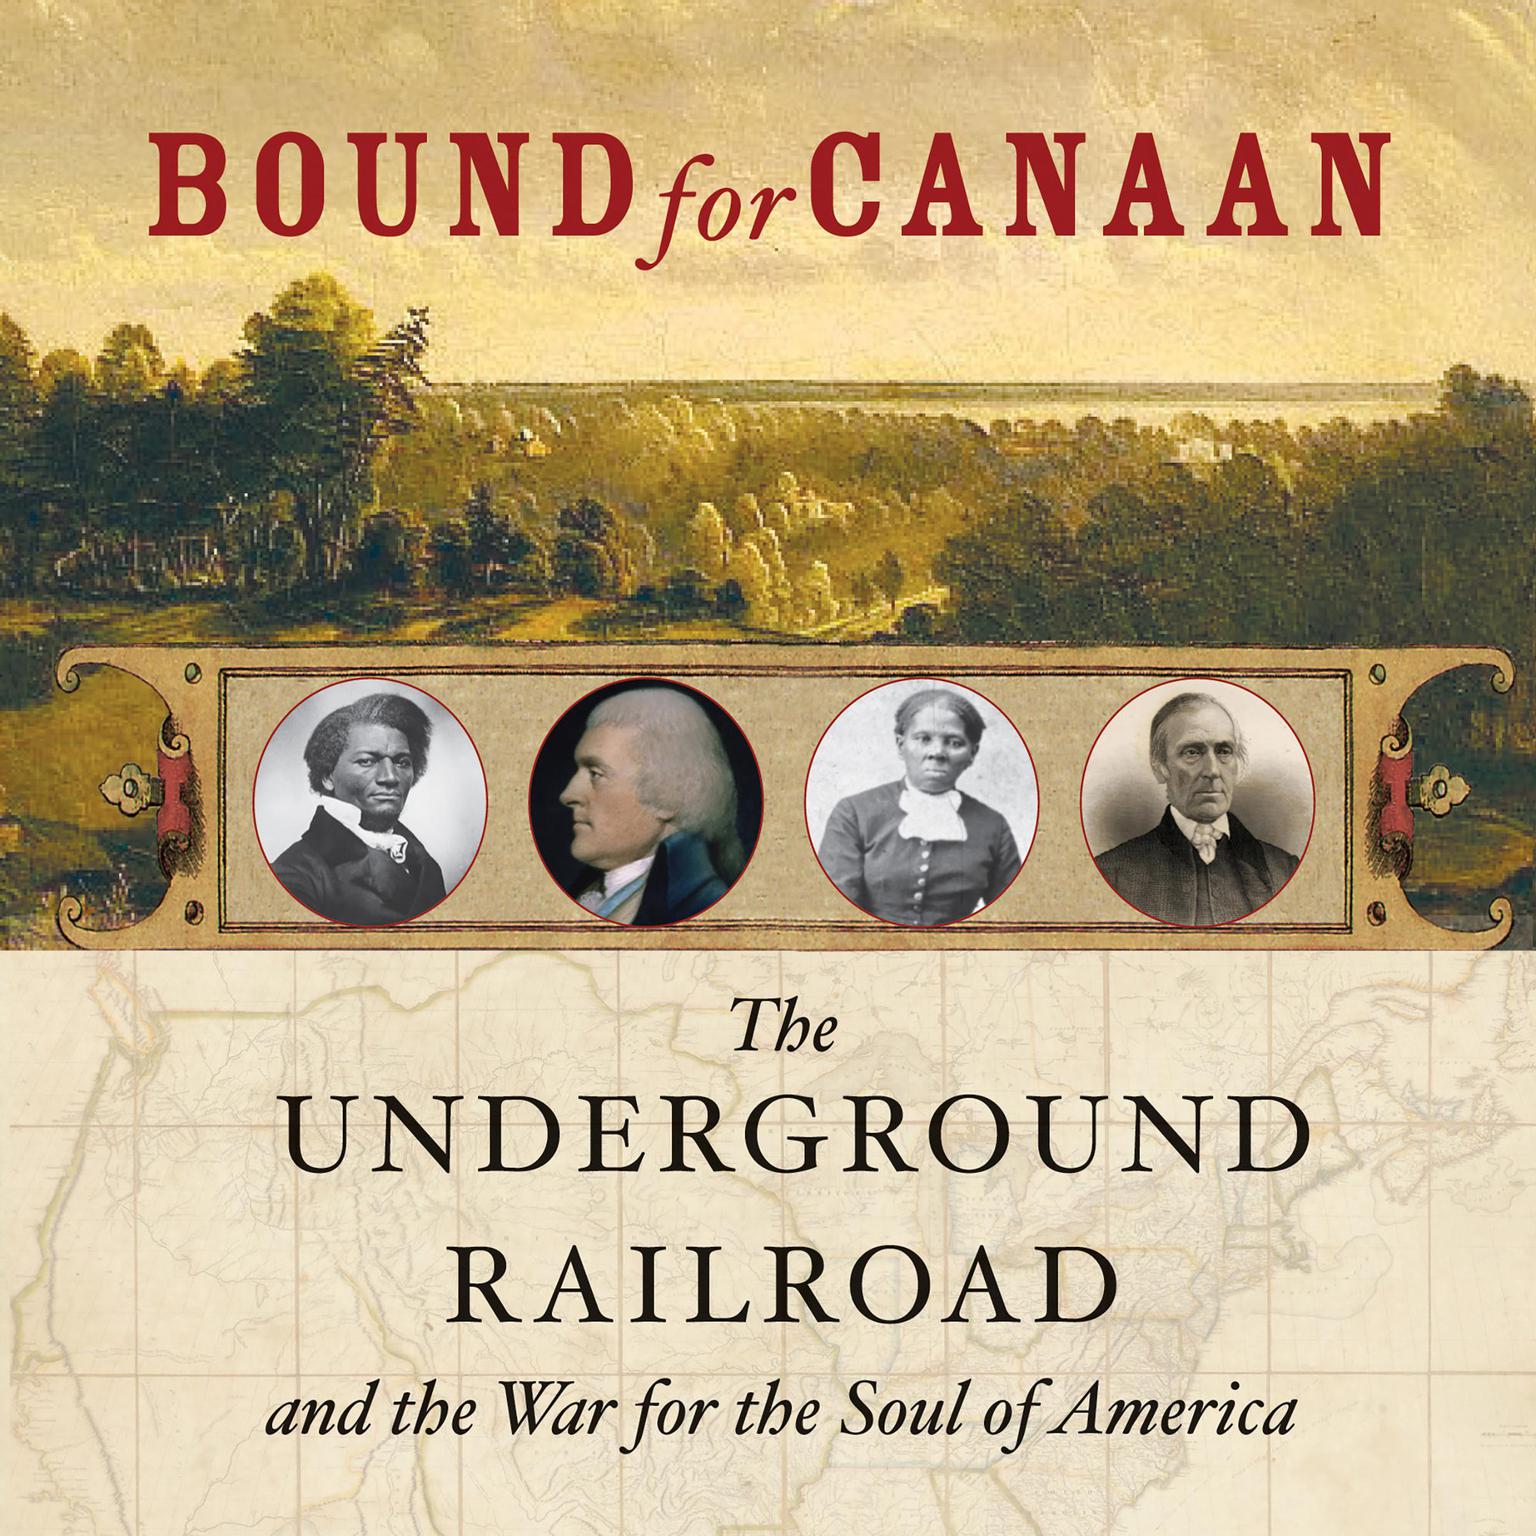 Bound for Canaan (Abridged): The Underground Railroad and the War for the Soul of America  Audiobook, by Fergus Bordewich